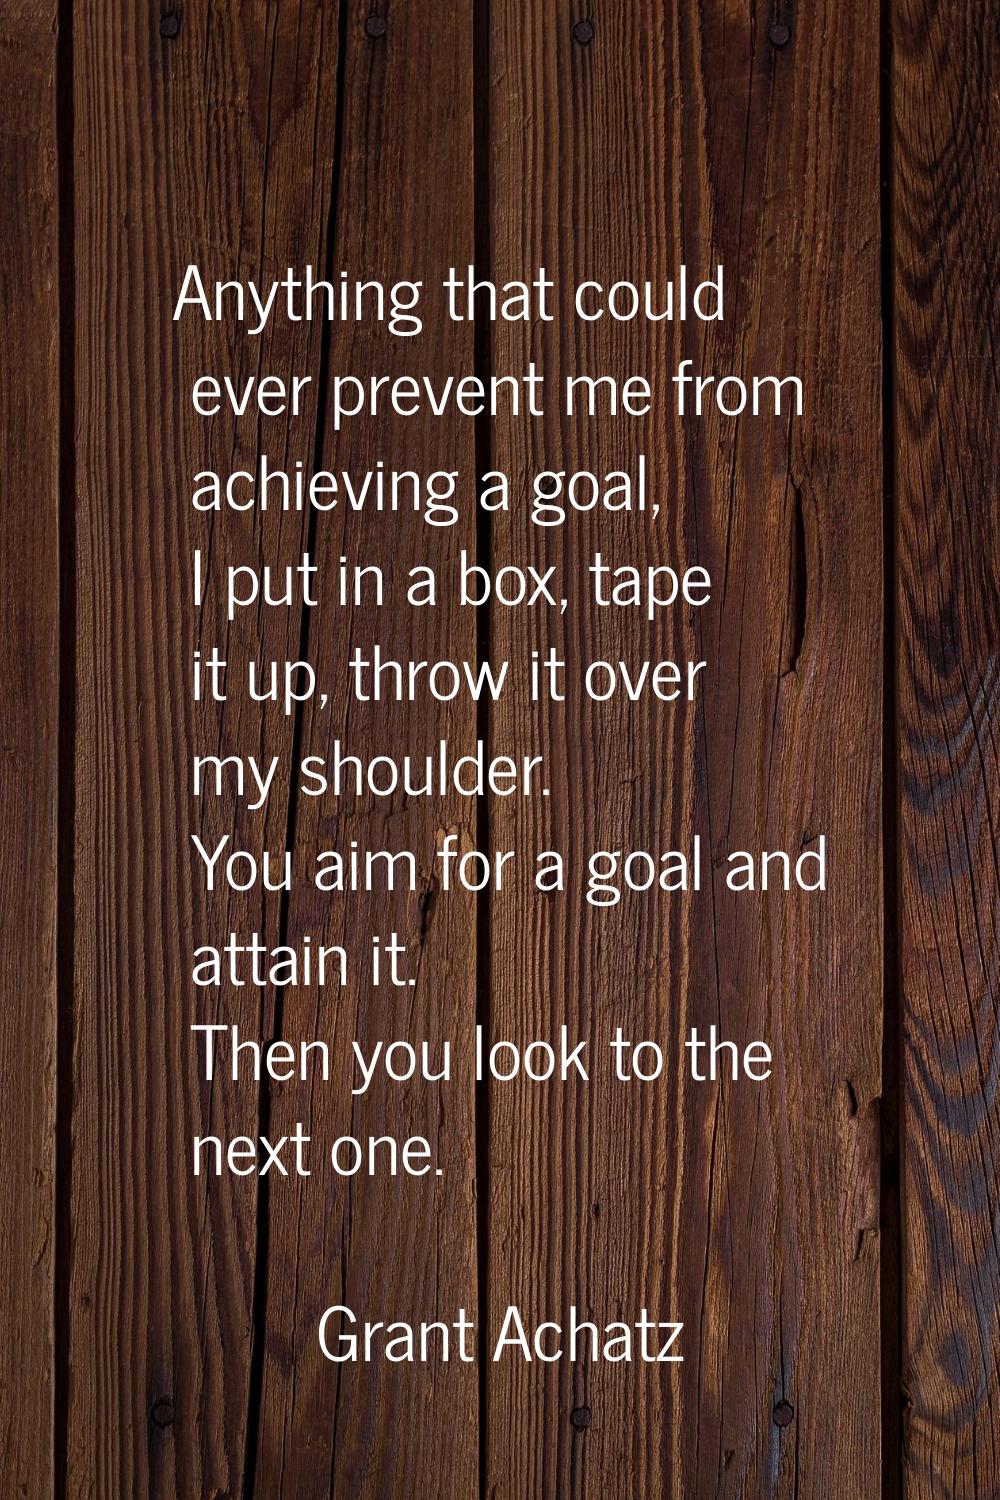 Anything that could ever prevent me from achieving a goal, I put in a box, tape it up, throw it ove